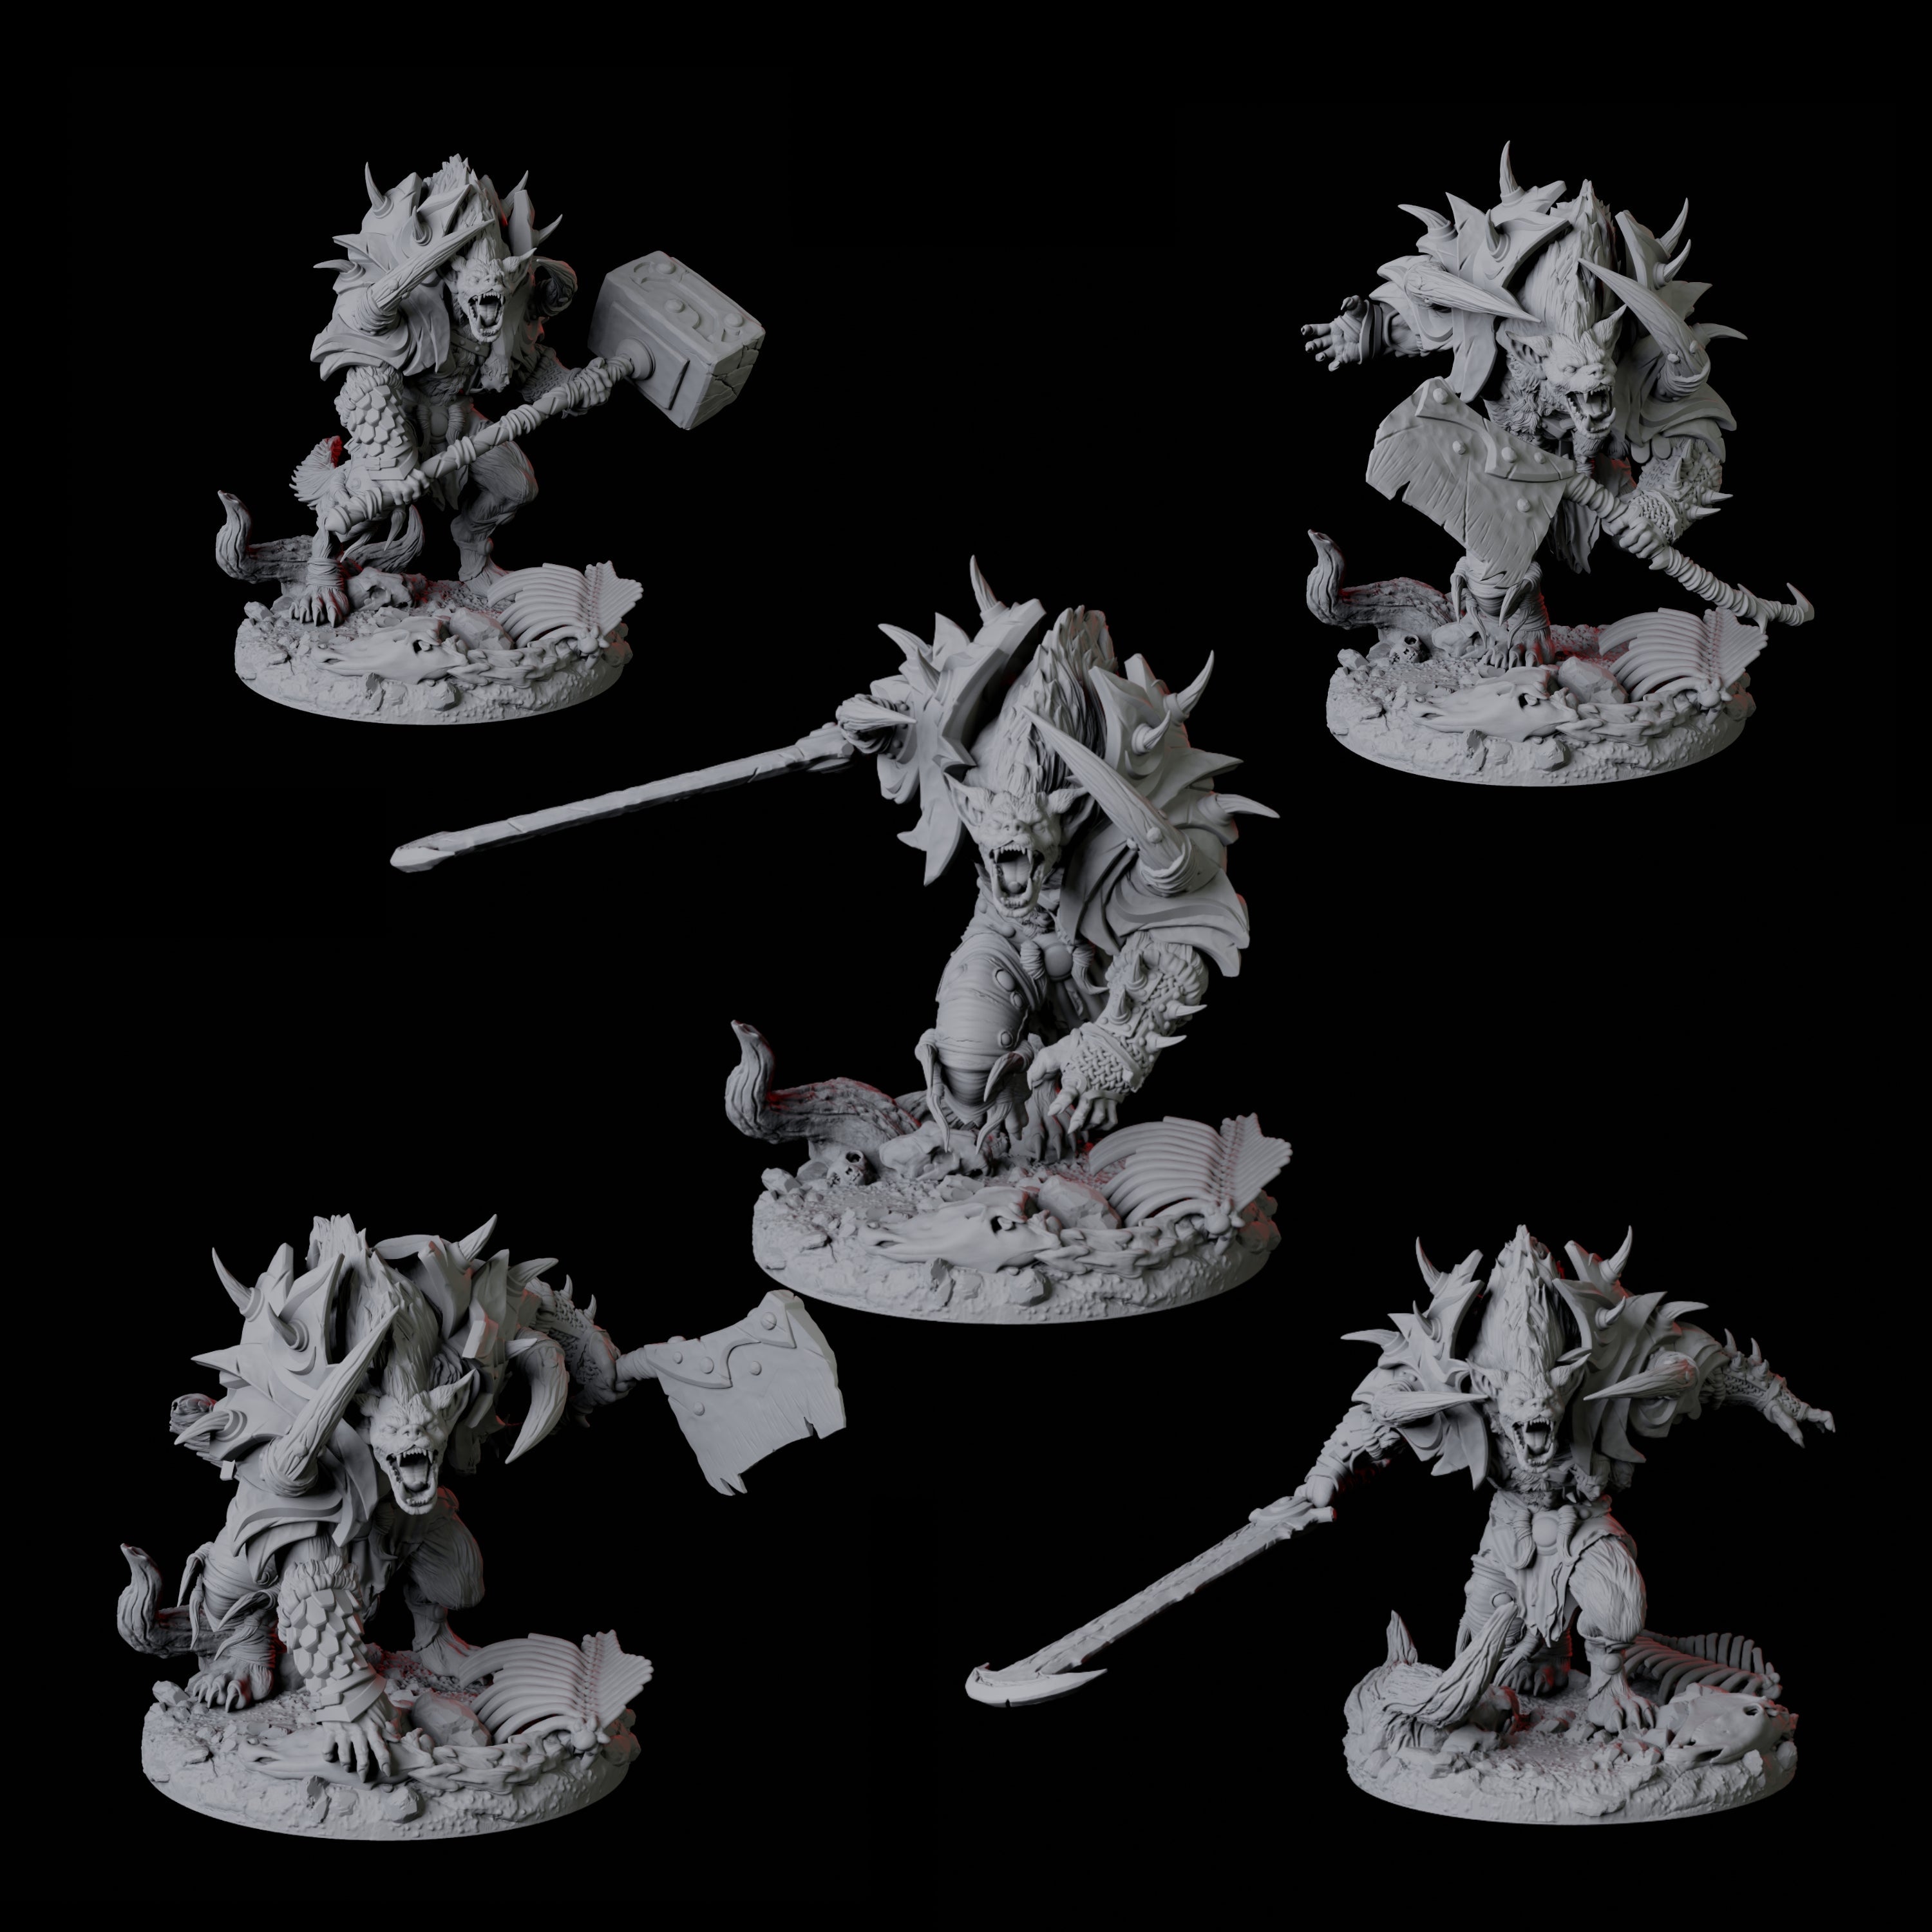 Five Bruising Gnoll Brutes Miniature for Dungeons and Dragons, Pathfinder or other TTRPGs